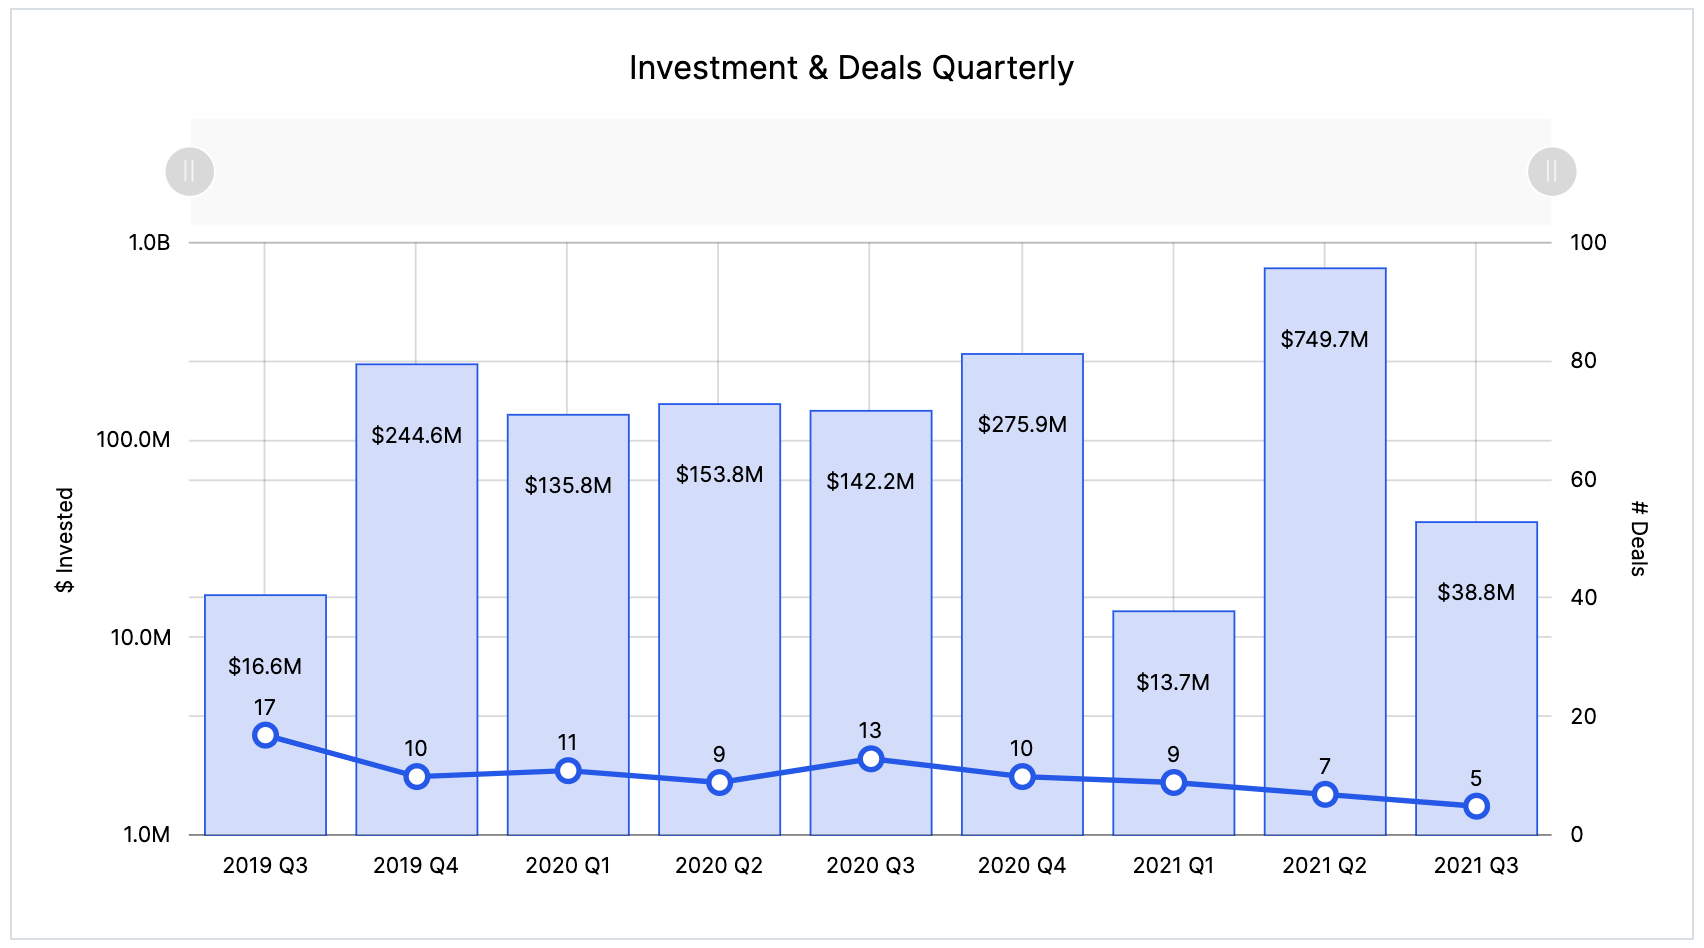 HS Wat Q3 21 funding and deals